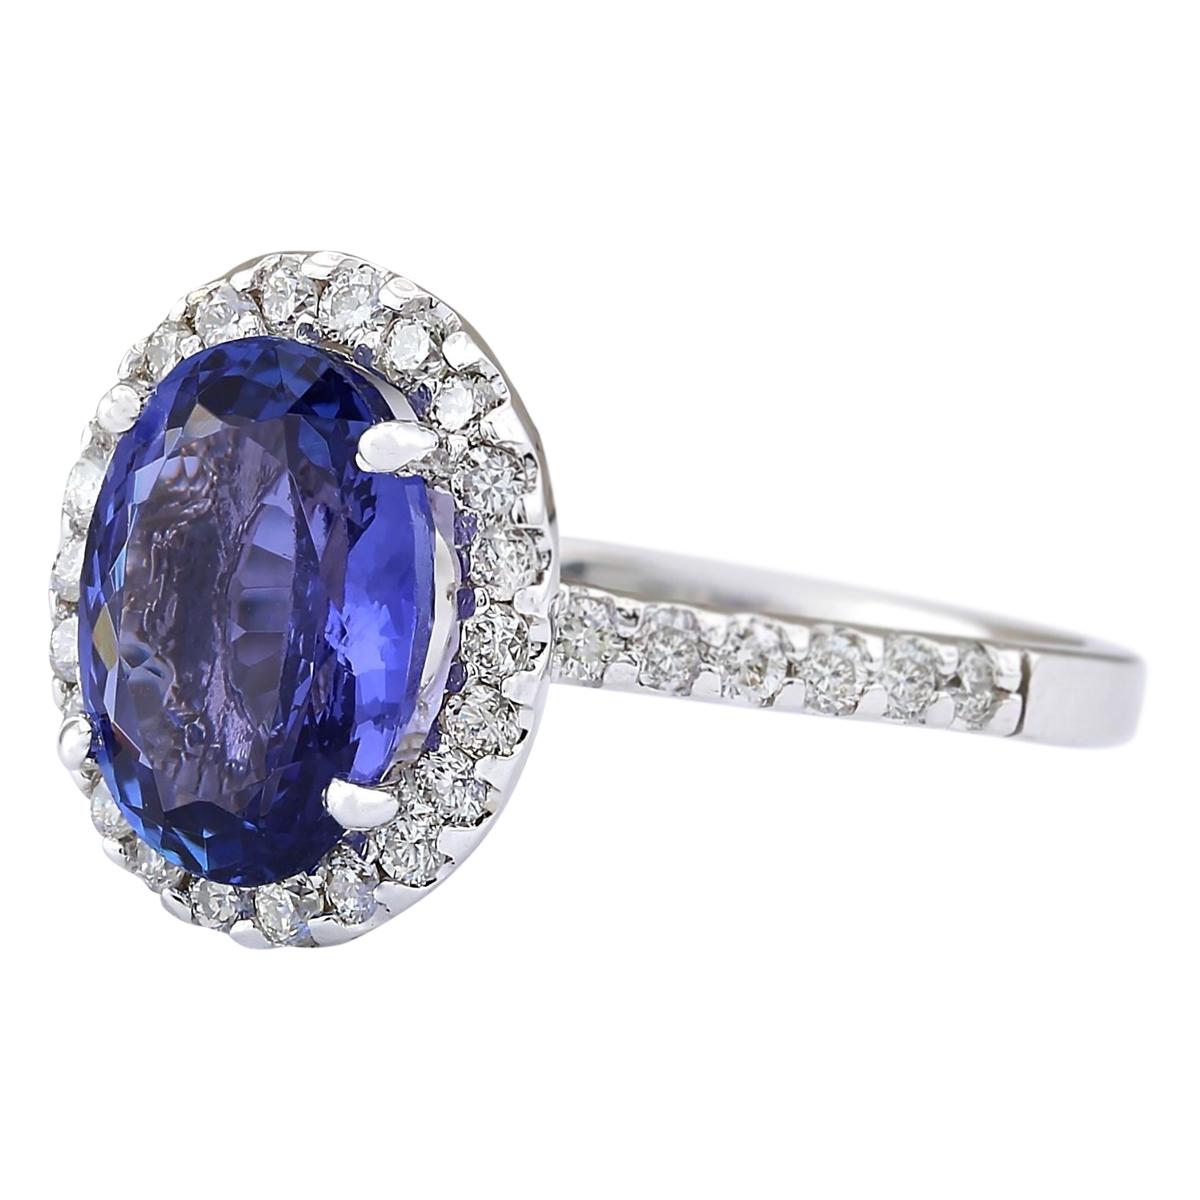 Presenting our exquisite 3.63 Carat Natural Tanzanite Ring, meticulously crafted in 14K White Gold. This stunning piece boasts a captivating Tanzanite gemstone weighing 3.03 carats, with dimensions of 10.00x8.00 mm, exuding a mesmerizing allure.